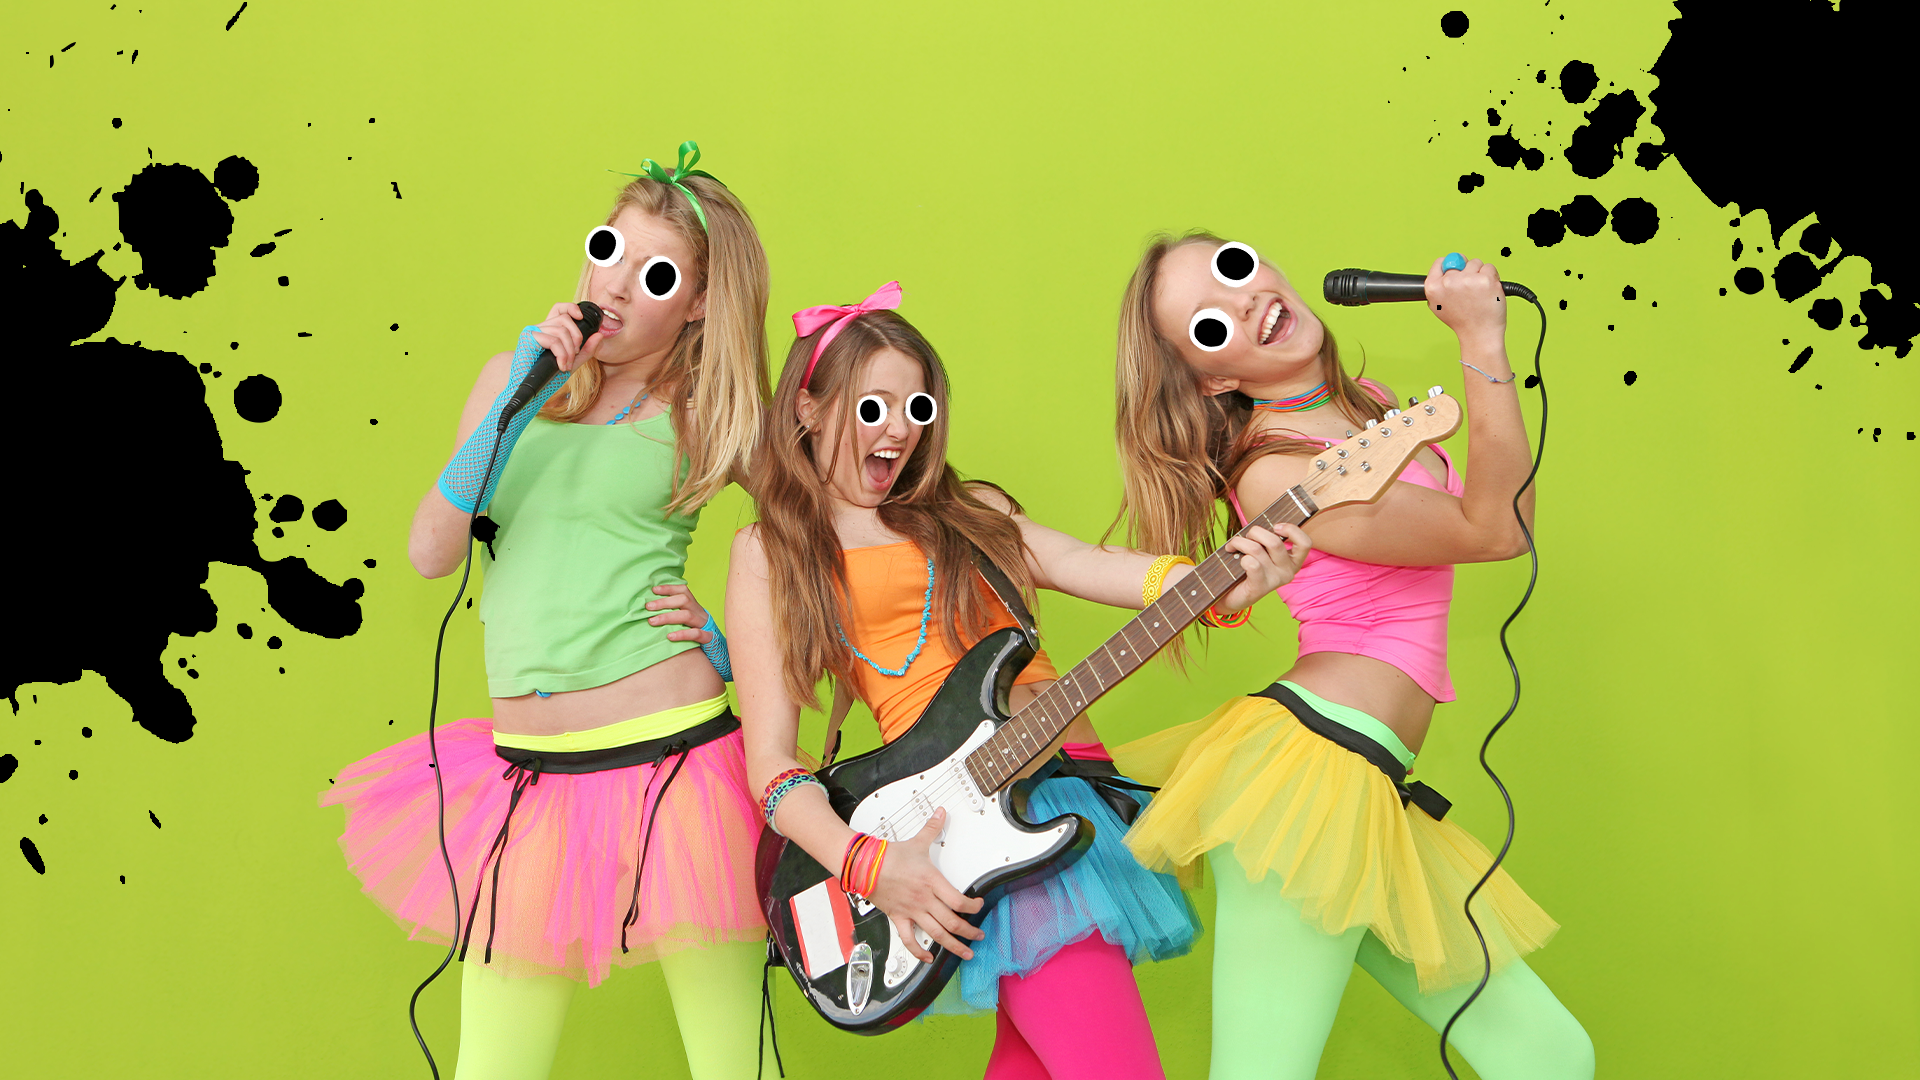 Girl band on green background with splats 